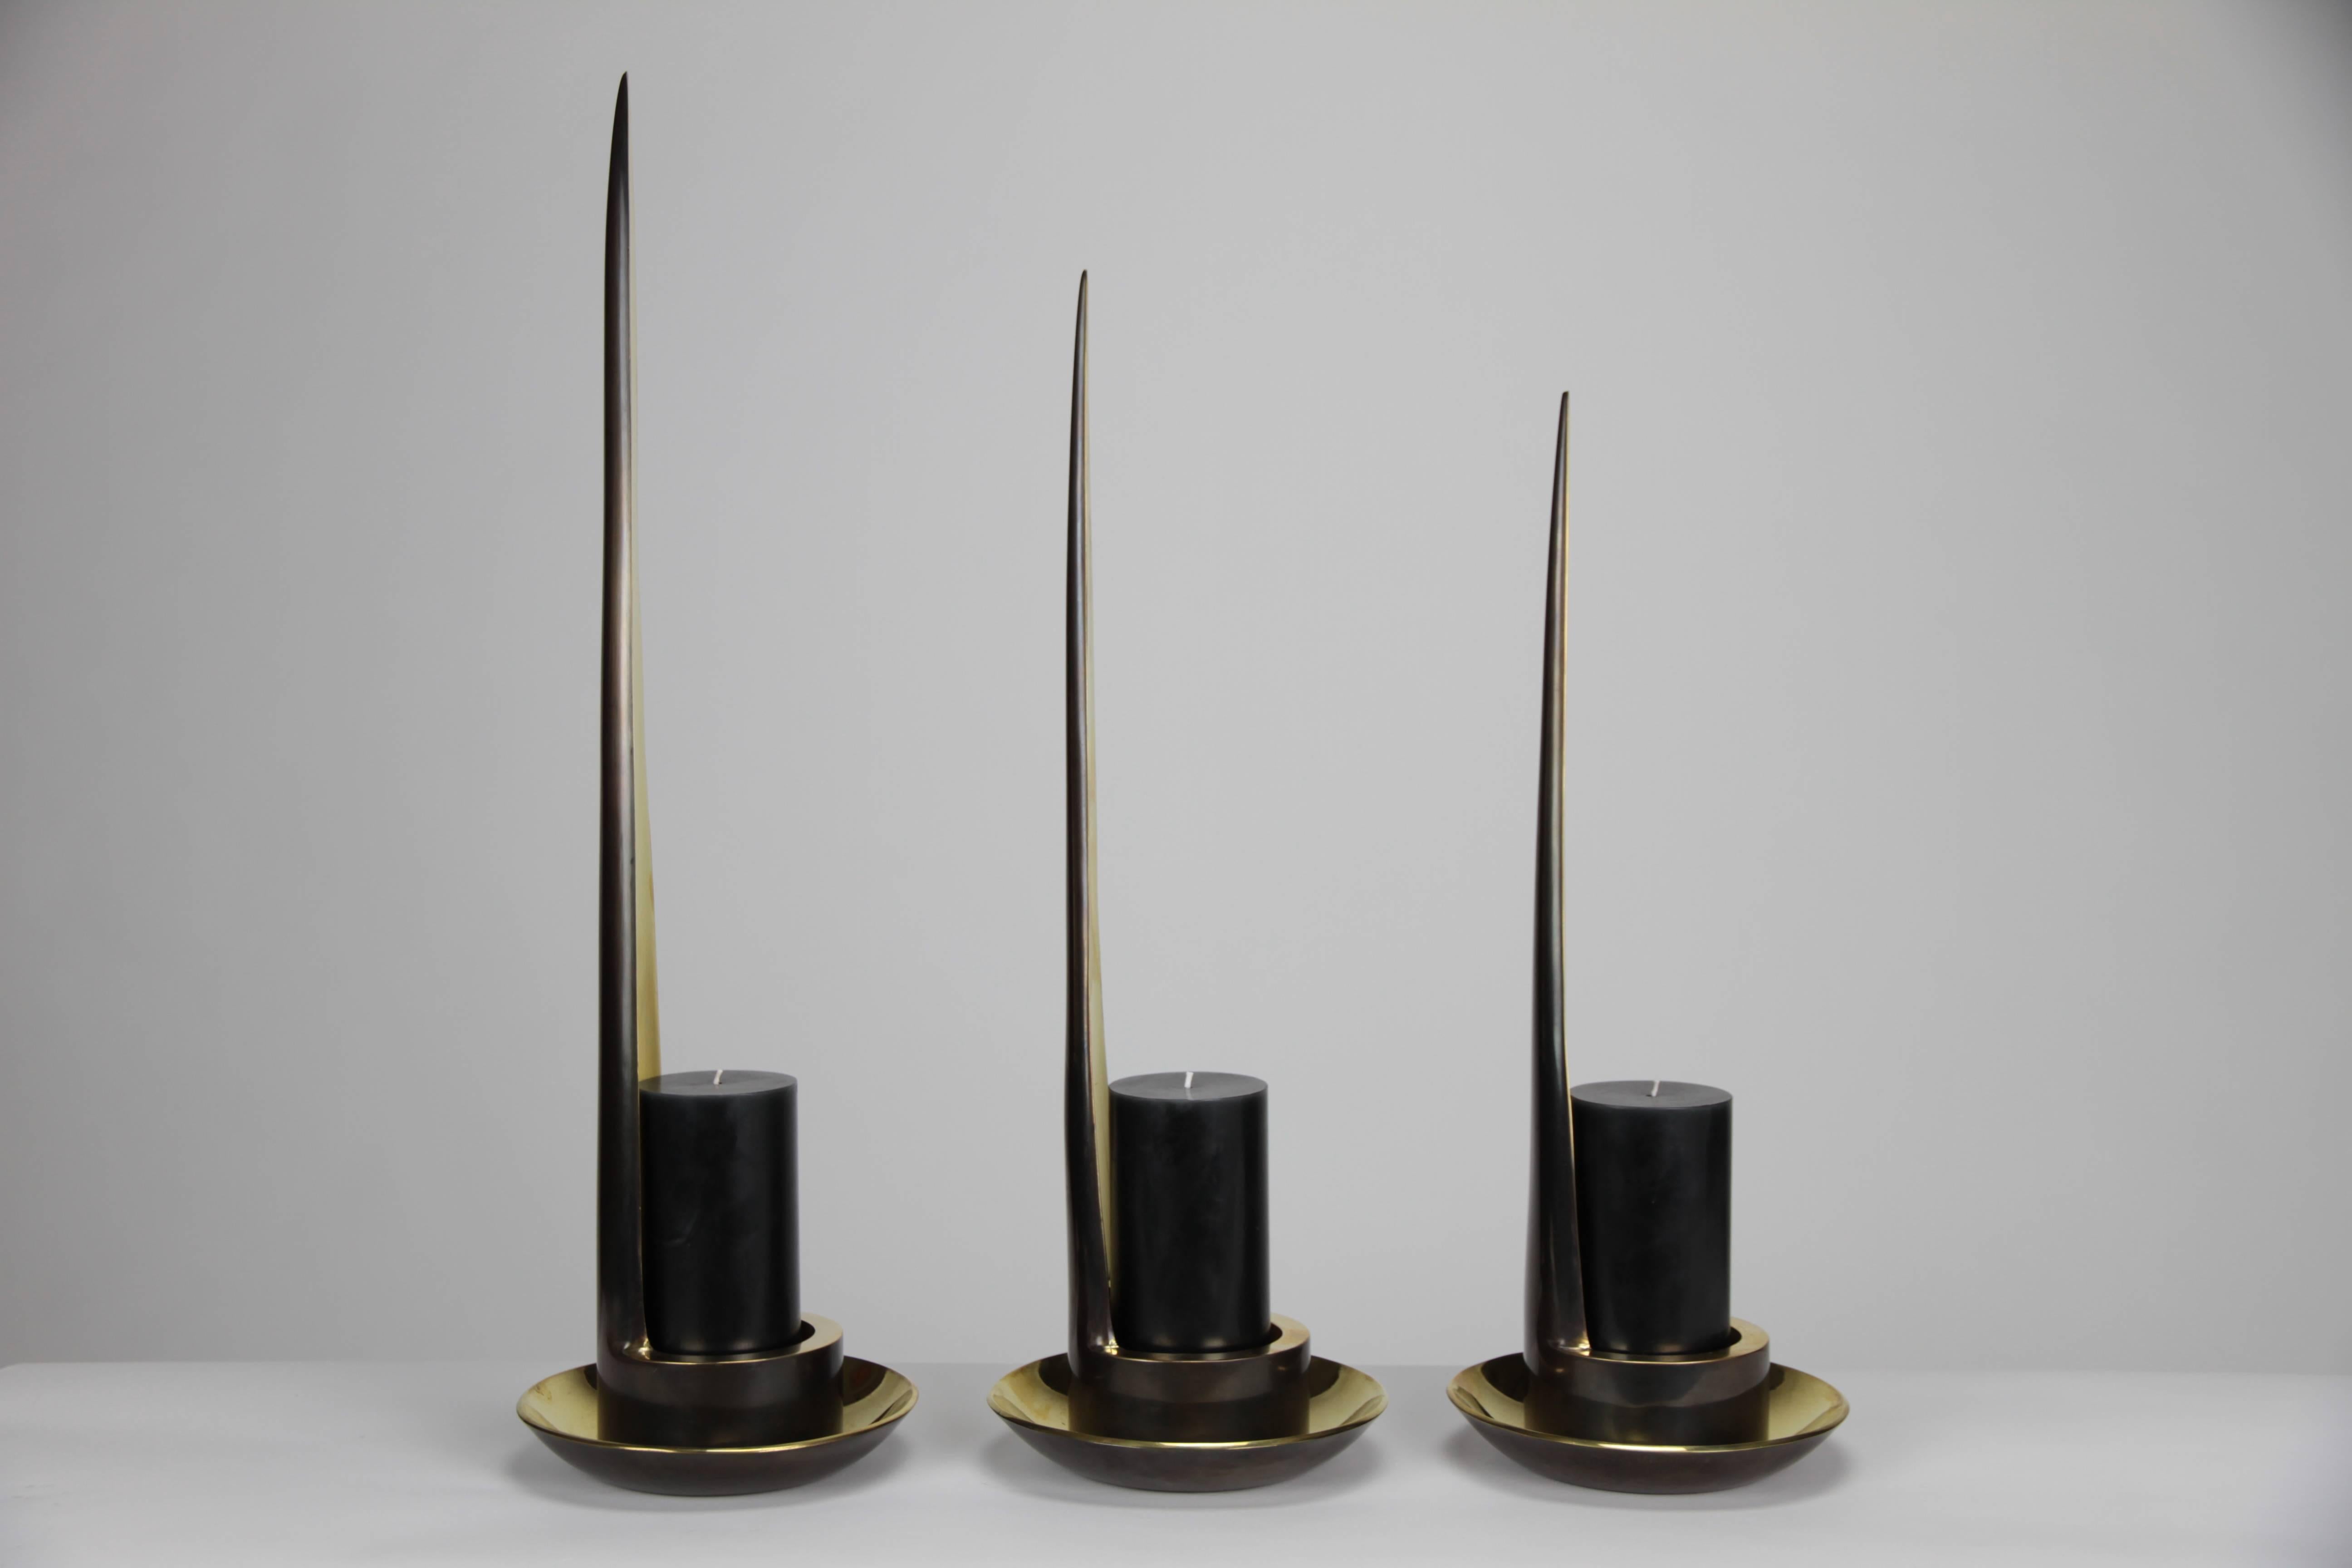 The Stiletto candleholders in brass are a collection of three. The severe yet soulful shape is inspired by women's beauty rituals.
The light from the 6